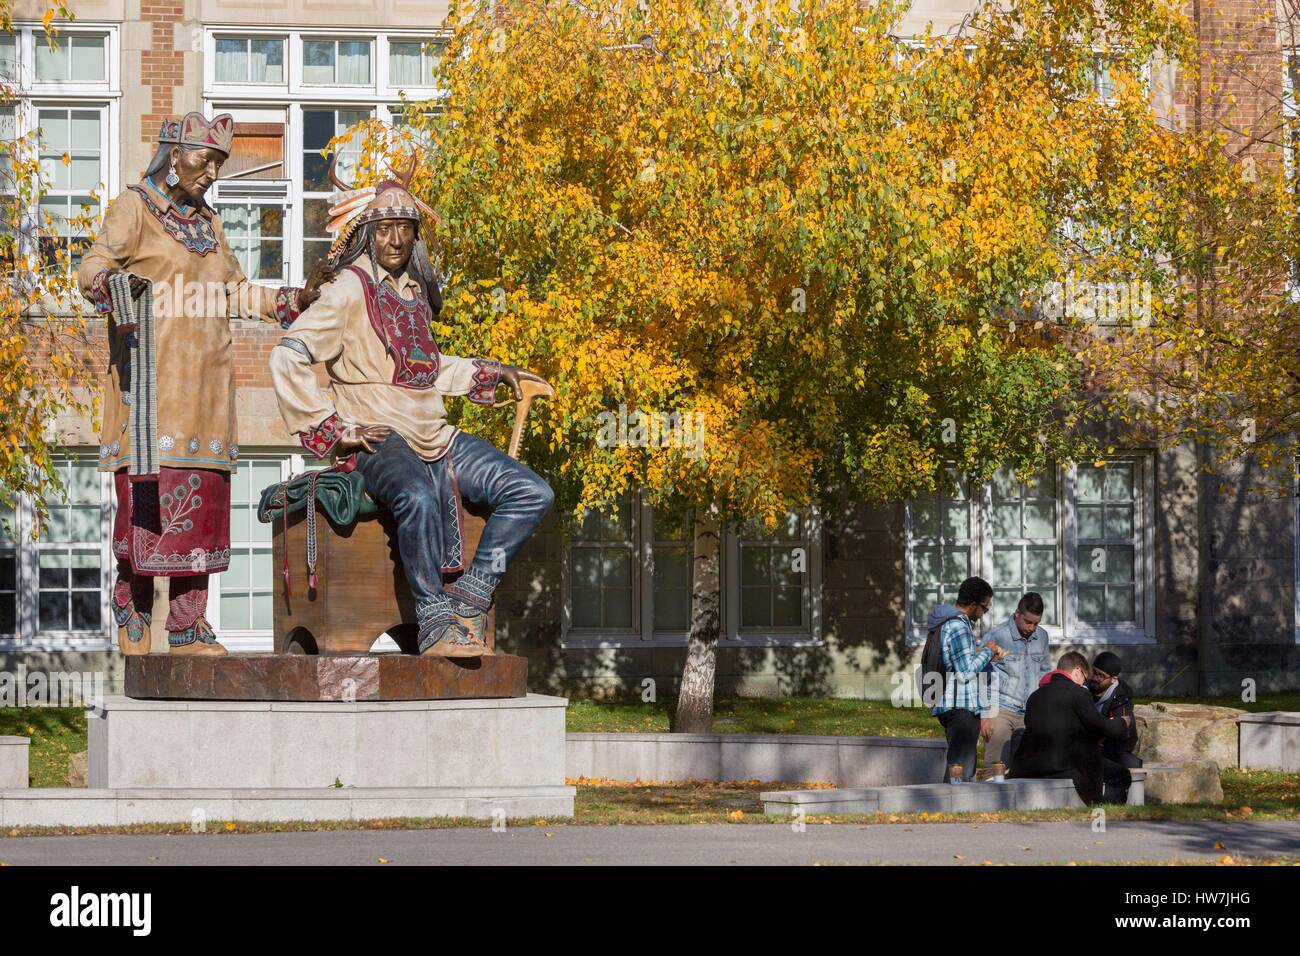 Canada, Quebec province, Montreal, Concordia University, Loyola Campus, bronze statue The Emergence of the Chief by artist Dave McGary, this sculpture pays homage to Iroquois heritage and the Mohawk Nation Stock Photo